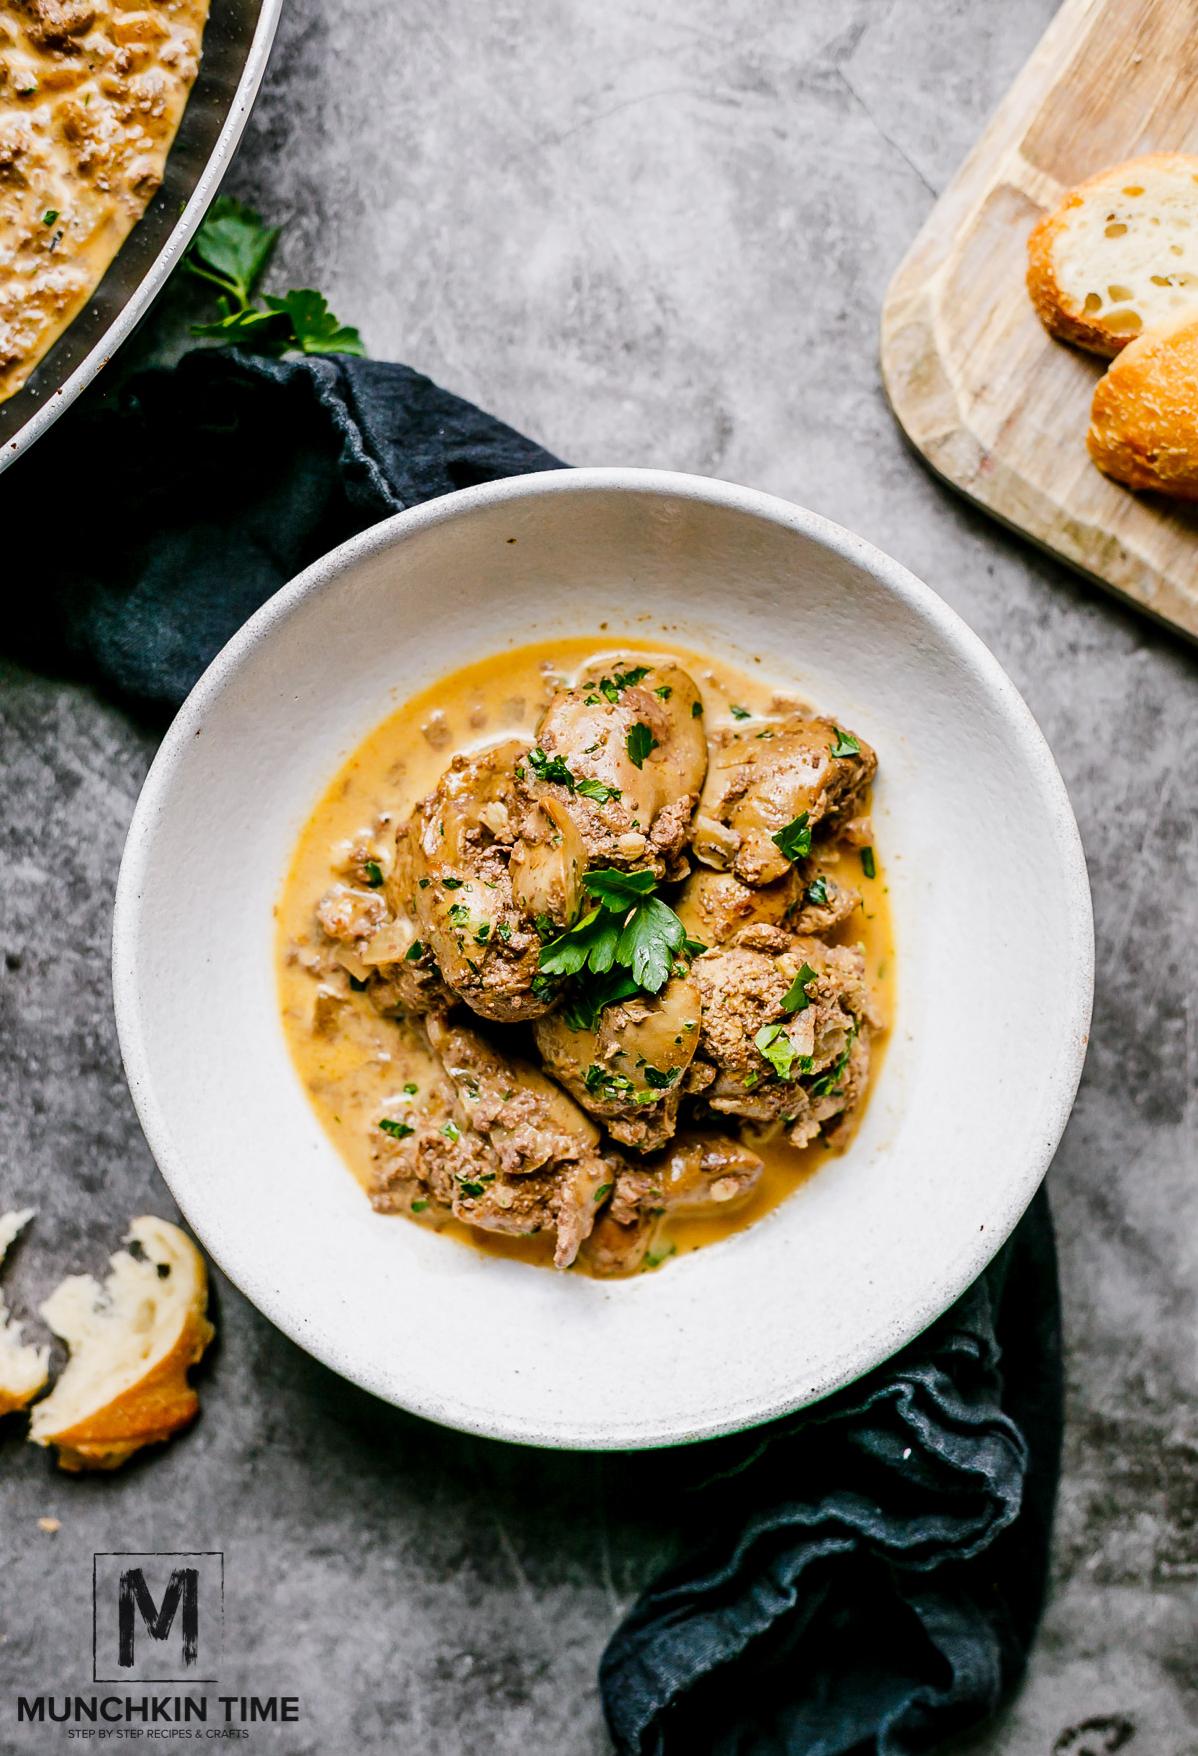  Chicken livers get a gourmet makeover in this dish.